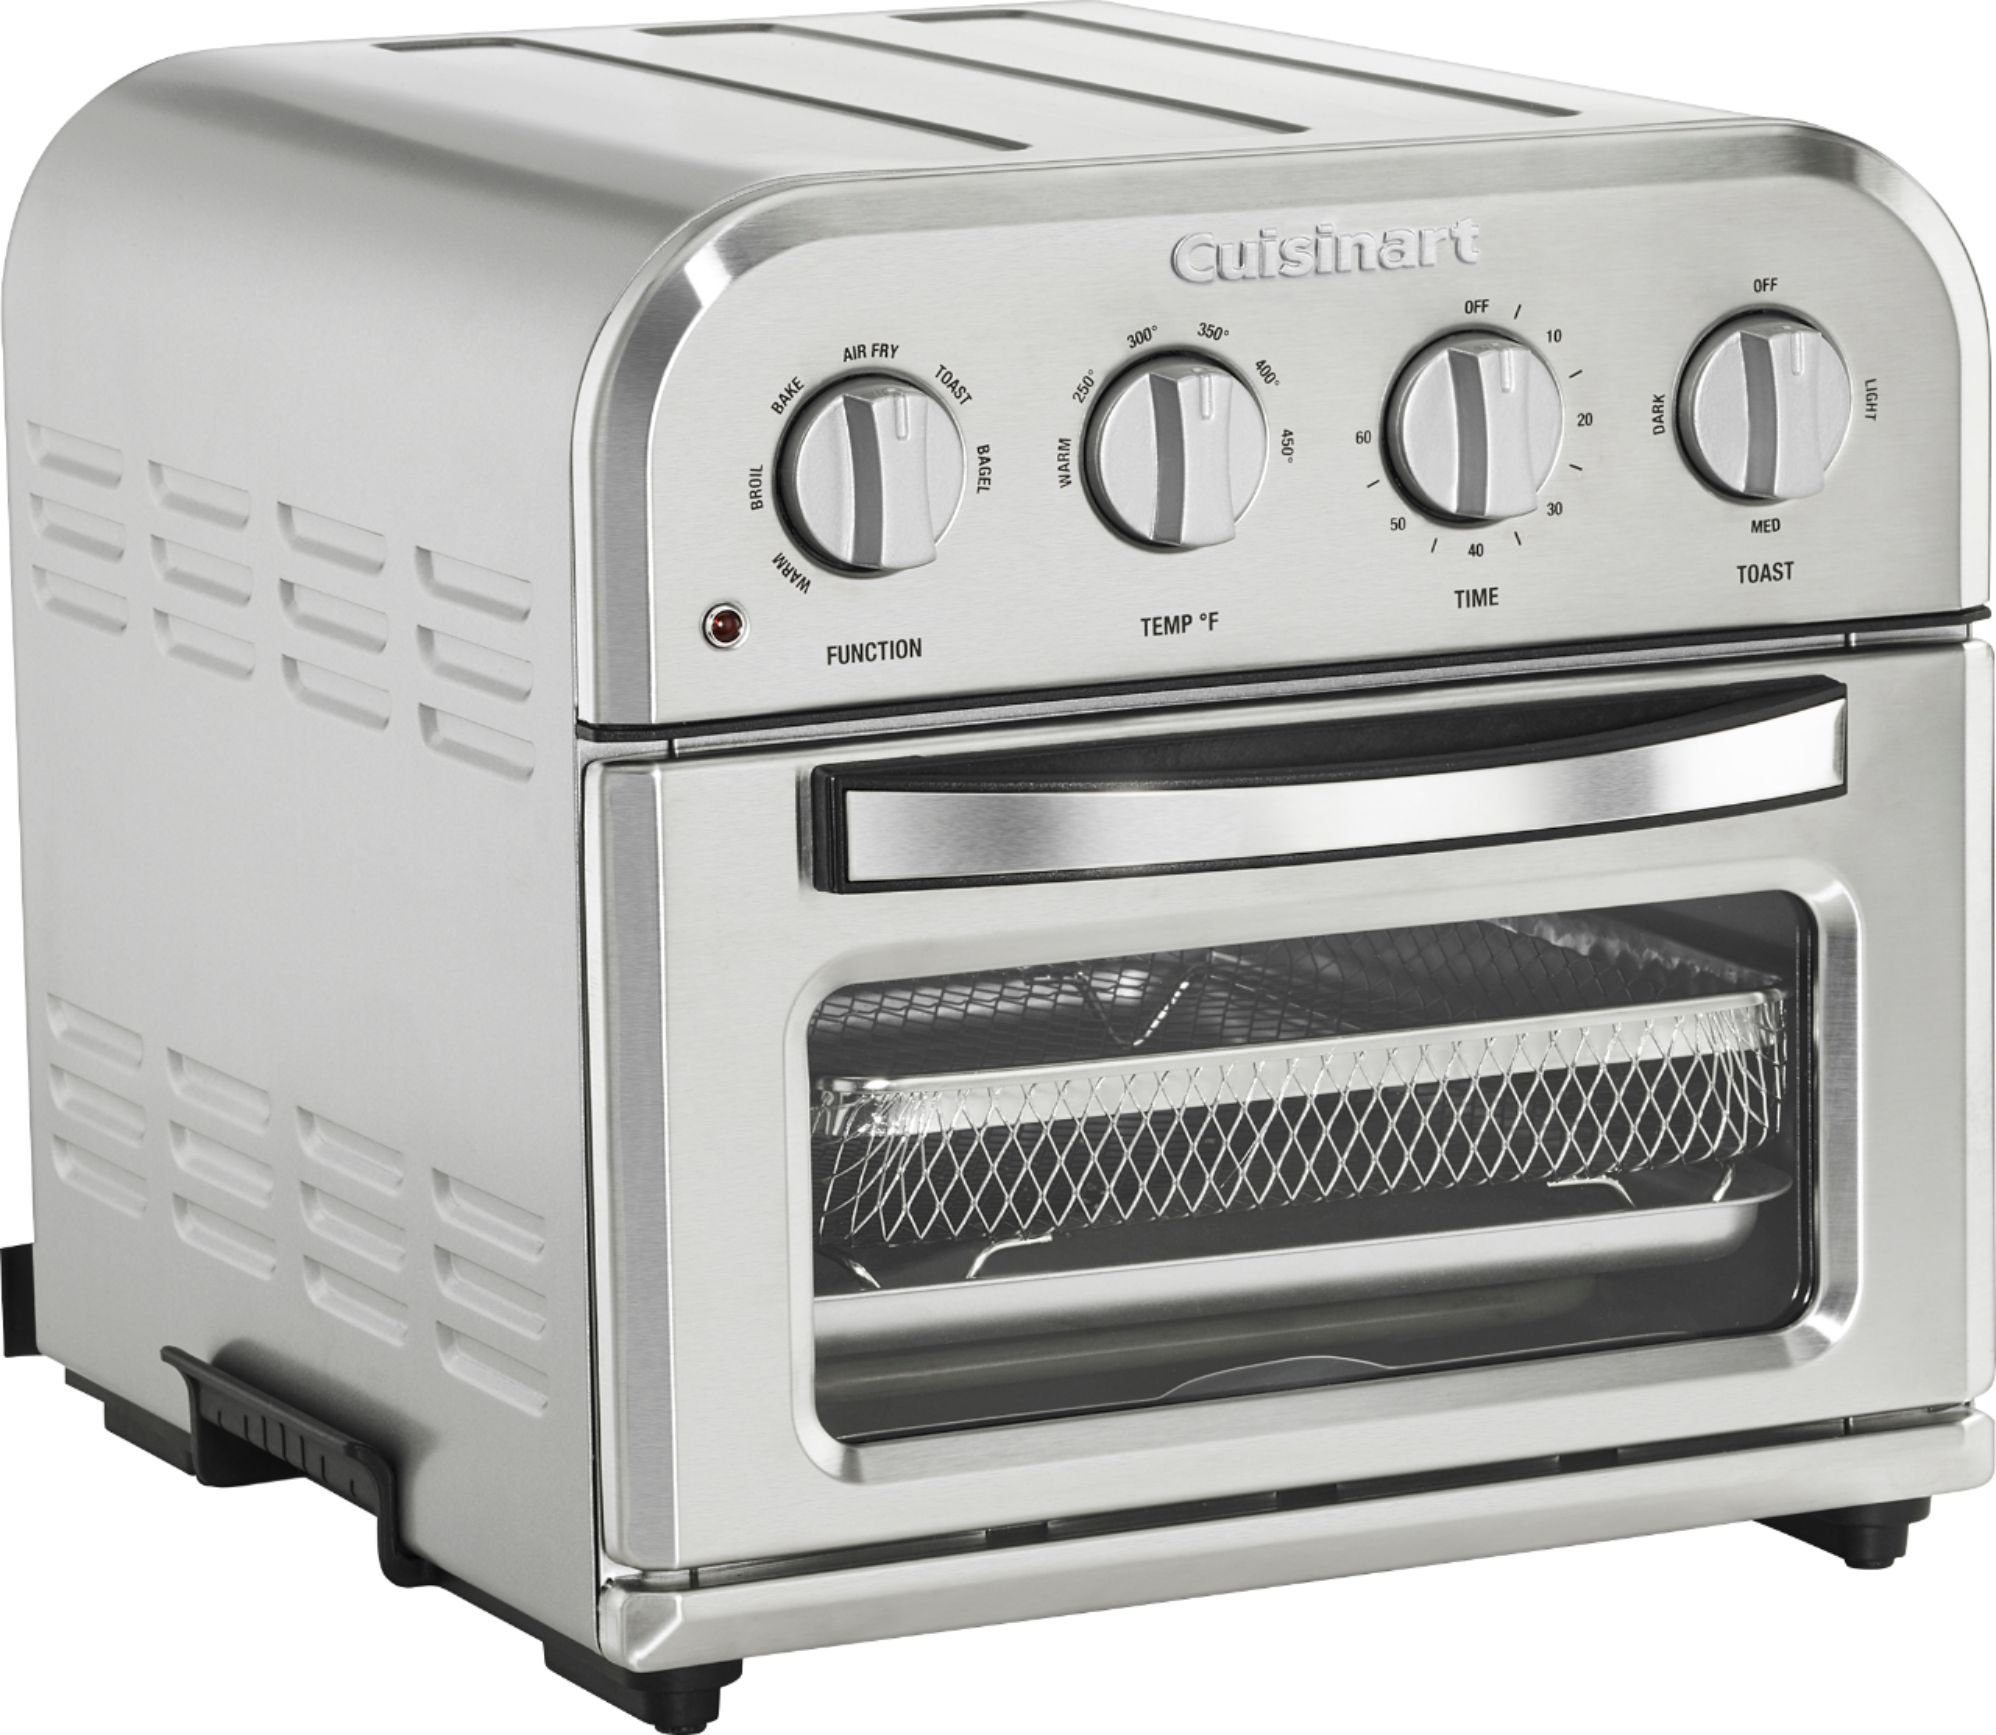 Cuisinart 4-Slice Convection Toaster Oven + Air Fryer Stainless Steel Cuisinart Air Fryer Stainless Steel